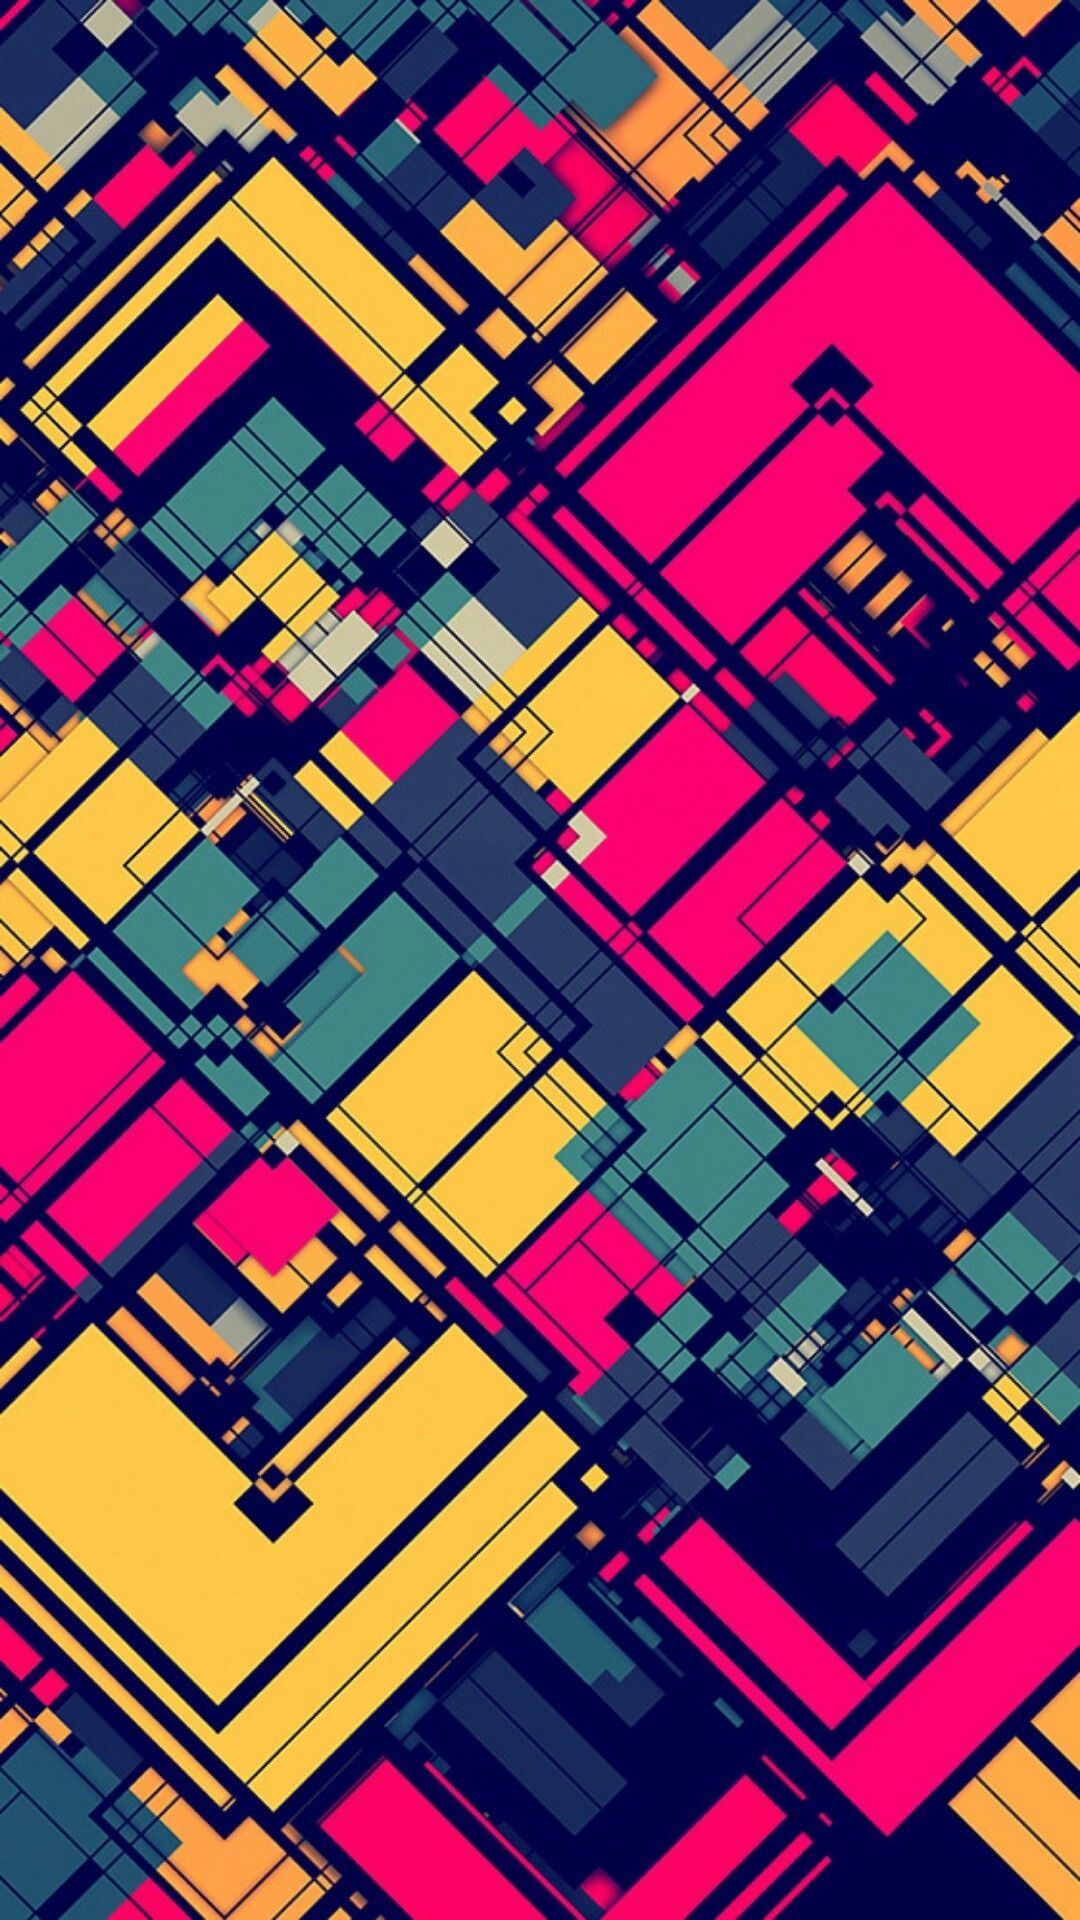 Pink and Yellow Abstract Grid Wallpaper. Digital illustration